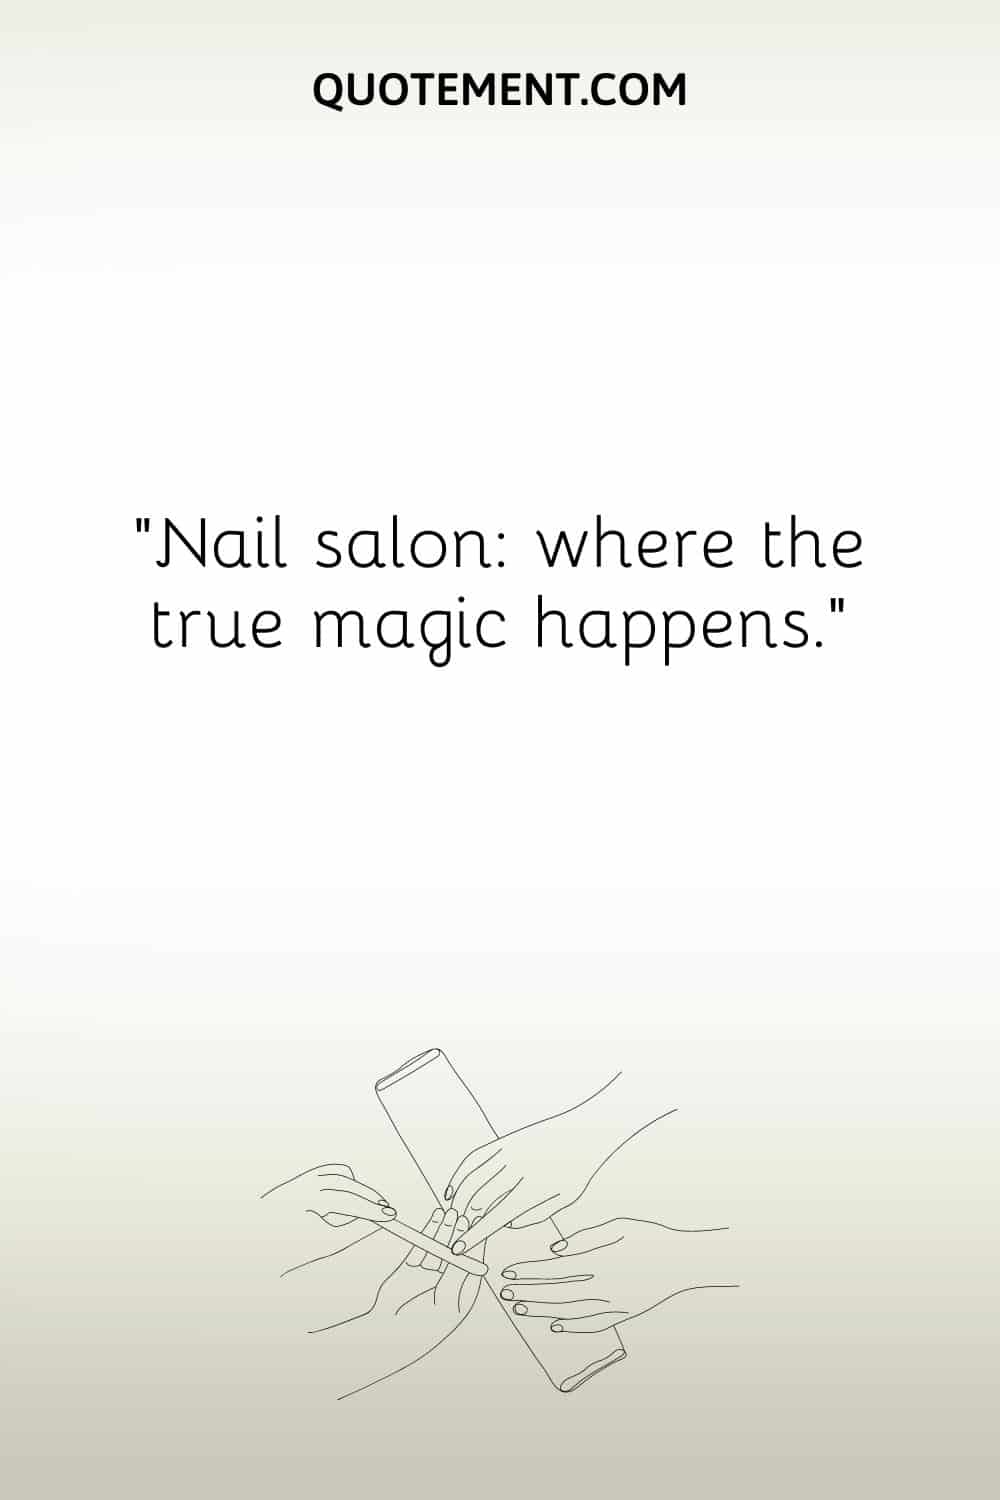 Quotes | from NAILS to NONSENSE...